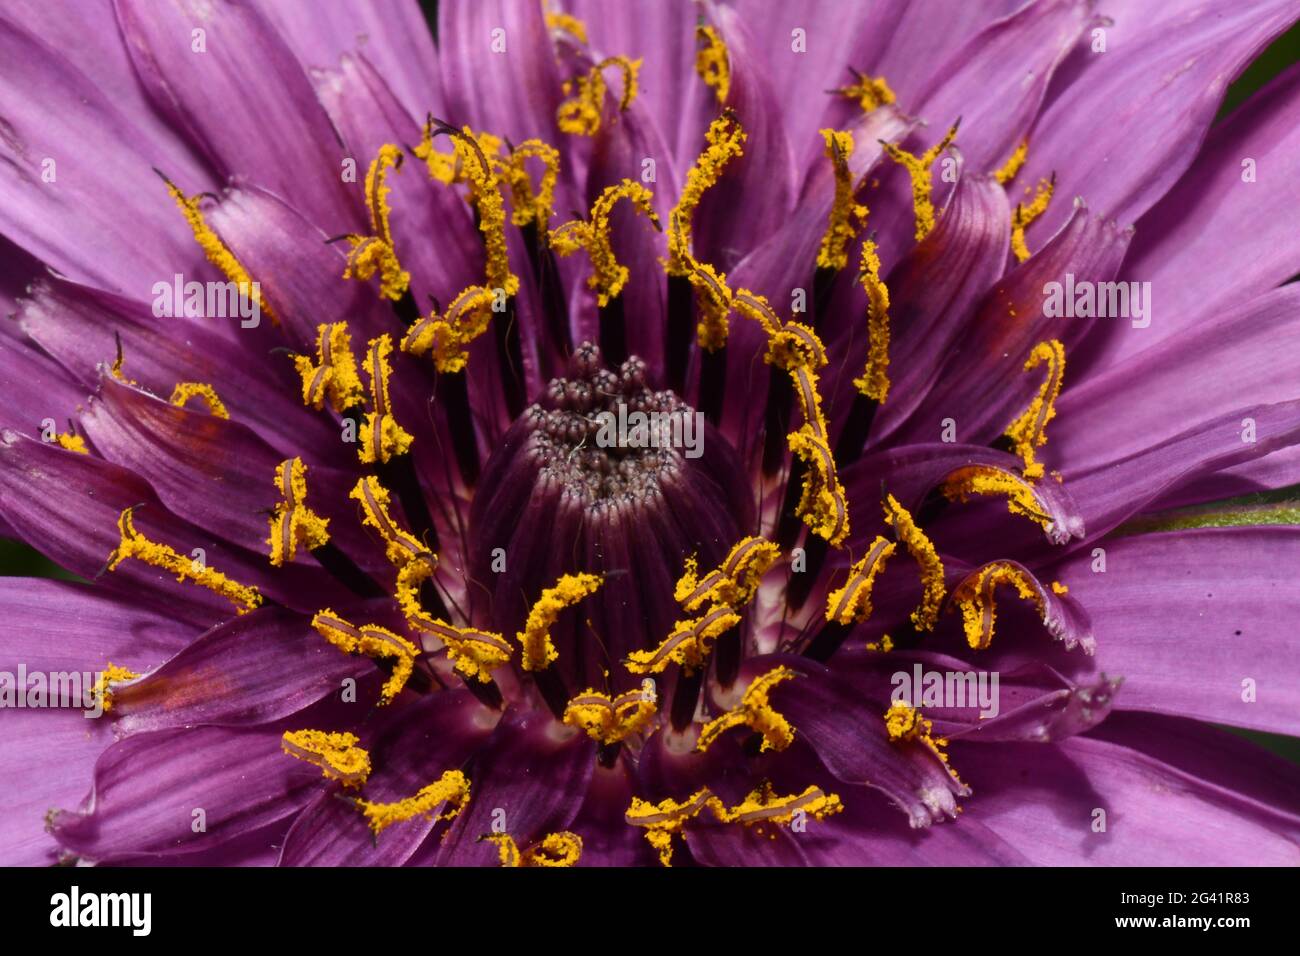 Salsify 'Tragopogon porrifolius' close-up of purple/ pink flower head, deep purple florets with golden yellow stigma.Abstract shapes contrasting colou Stock Photo